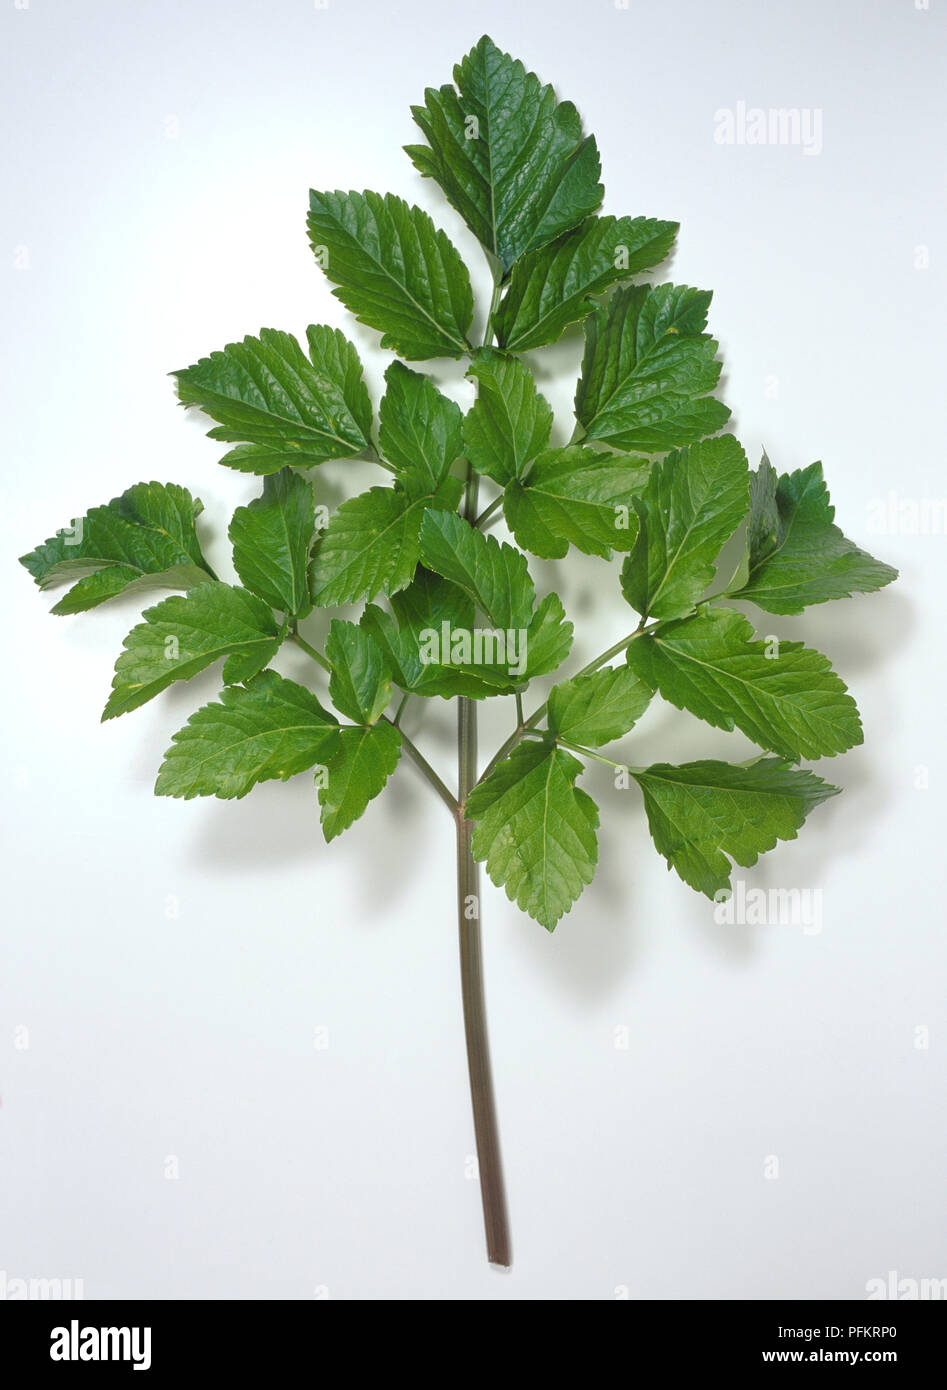 Smyrnium olusatrum, green bunch of leaves of alexanders or basal. Stock Photo